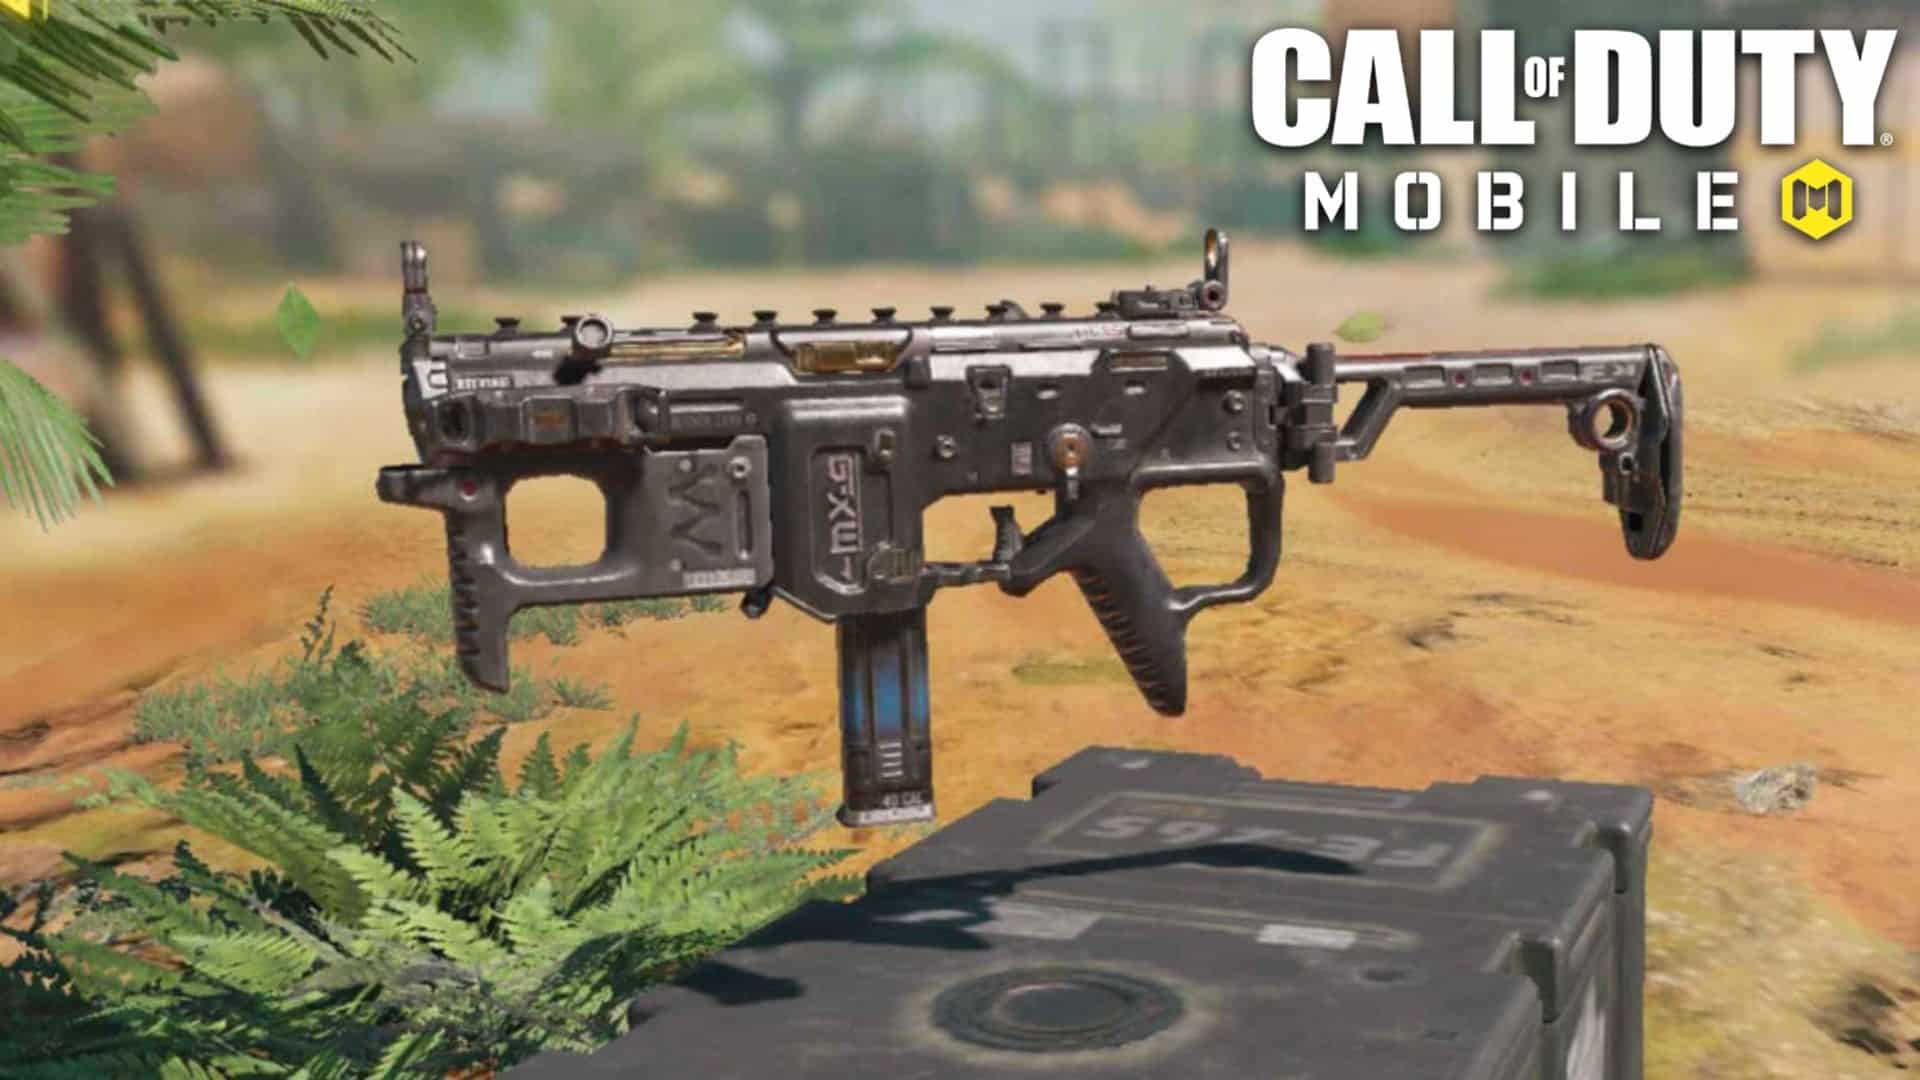 MX9 SMG in Call of Duty mobile loadout screen